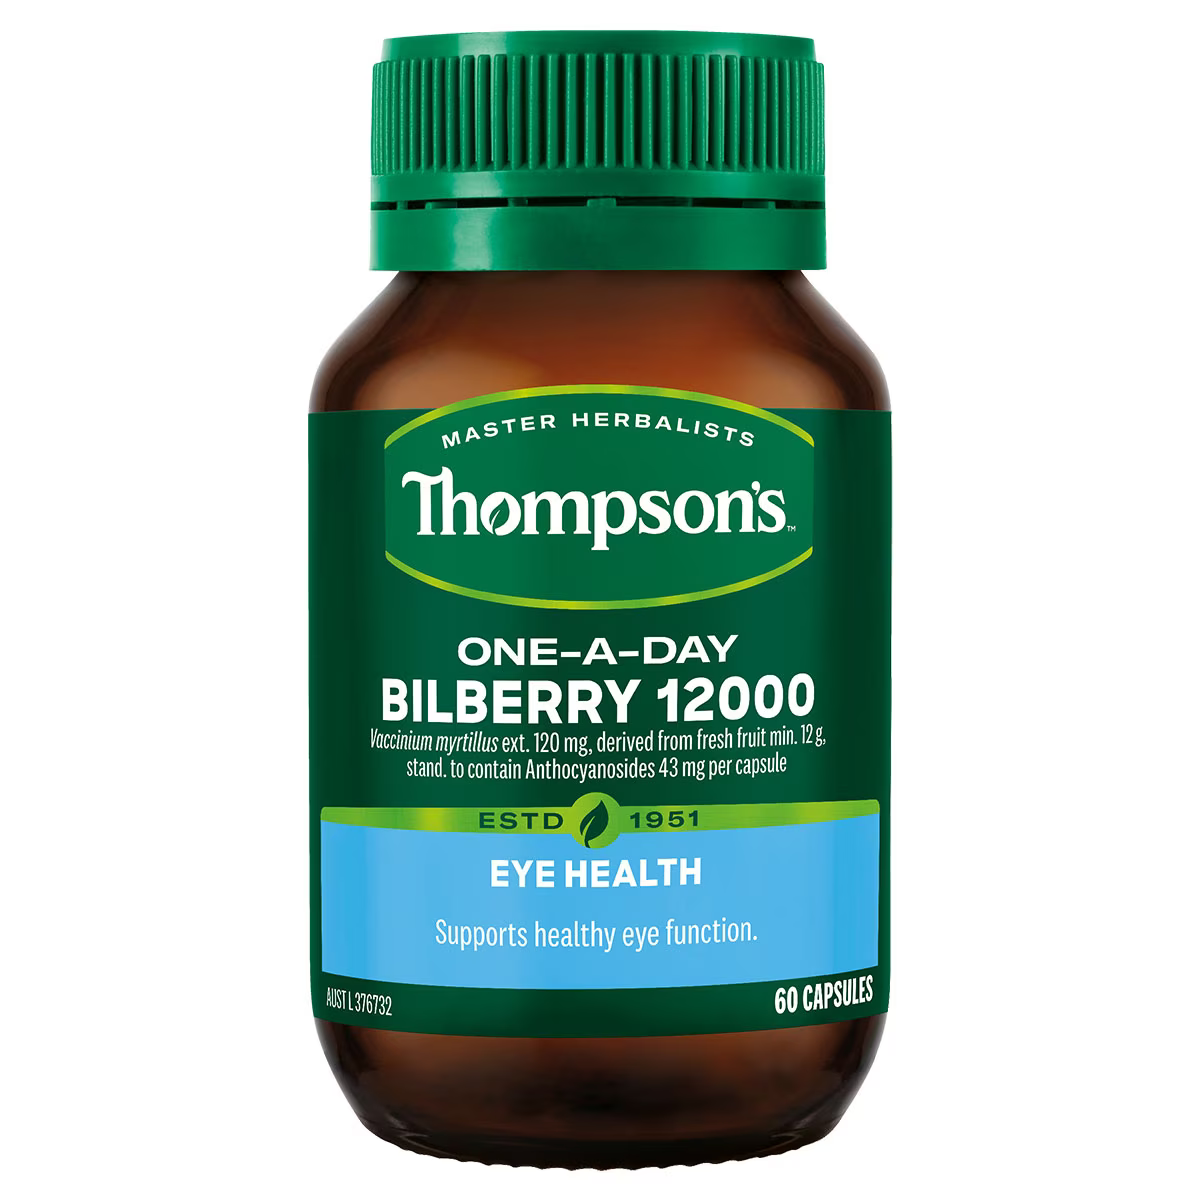 Thompsons One-a-day Bilberry 12000mg 60 Capsules